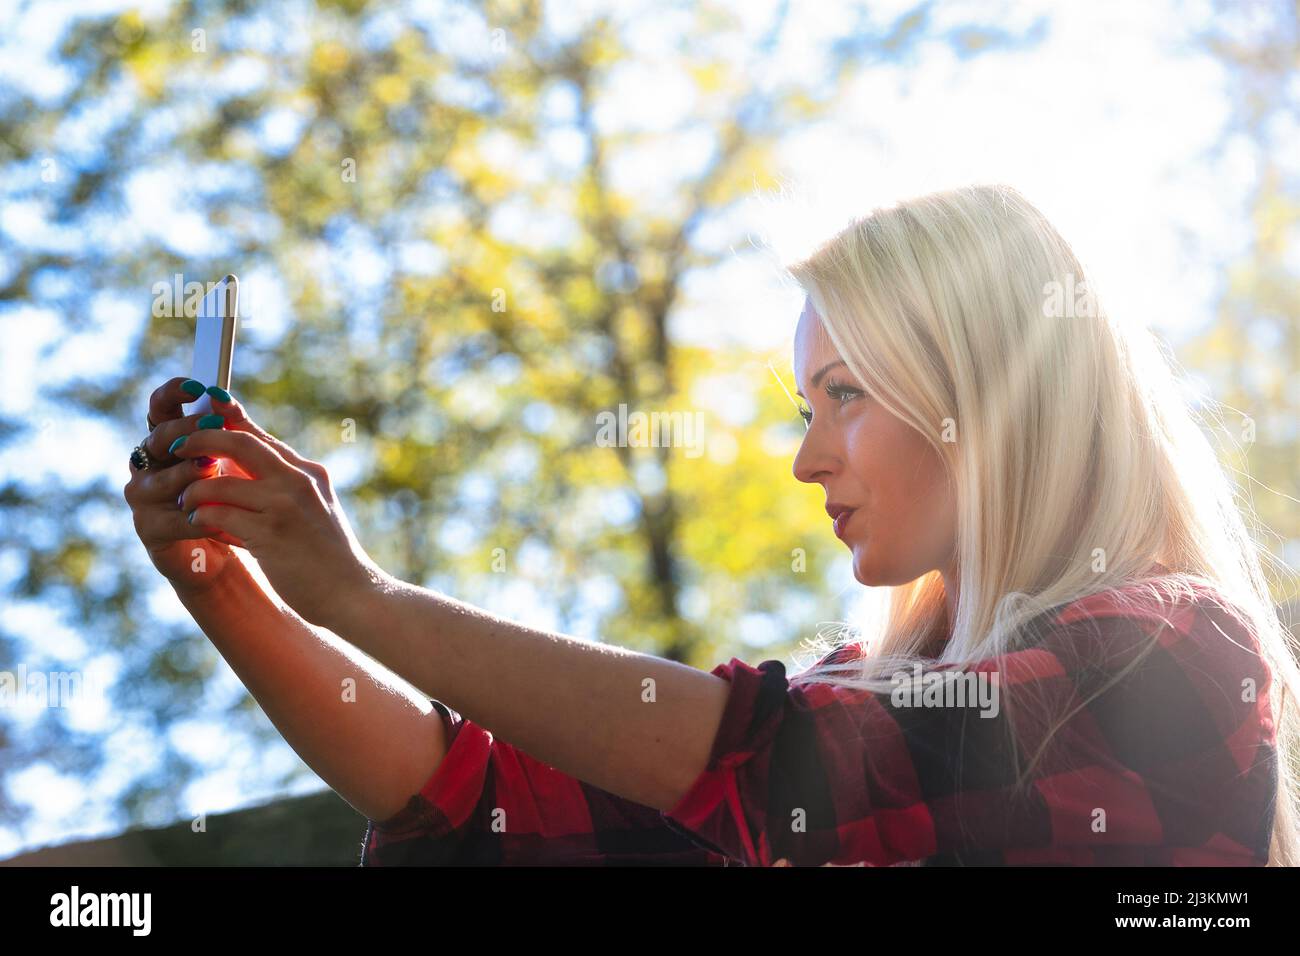 High key portrait of a young woman taking a backlit selfie on her mobile phone outdoors against leafy green trees in a low angle view Stock Photo